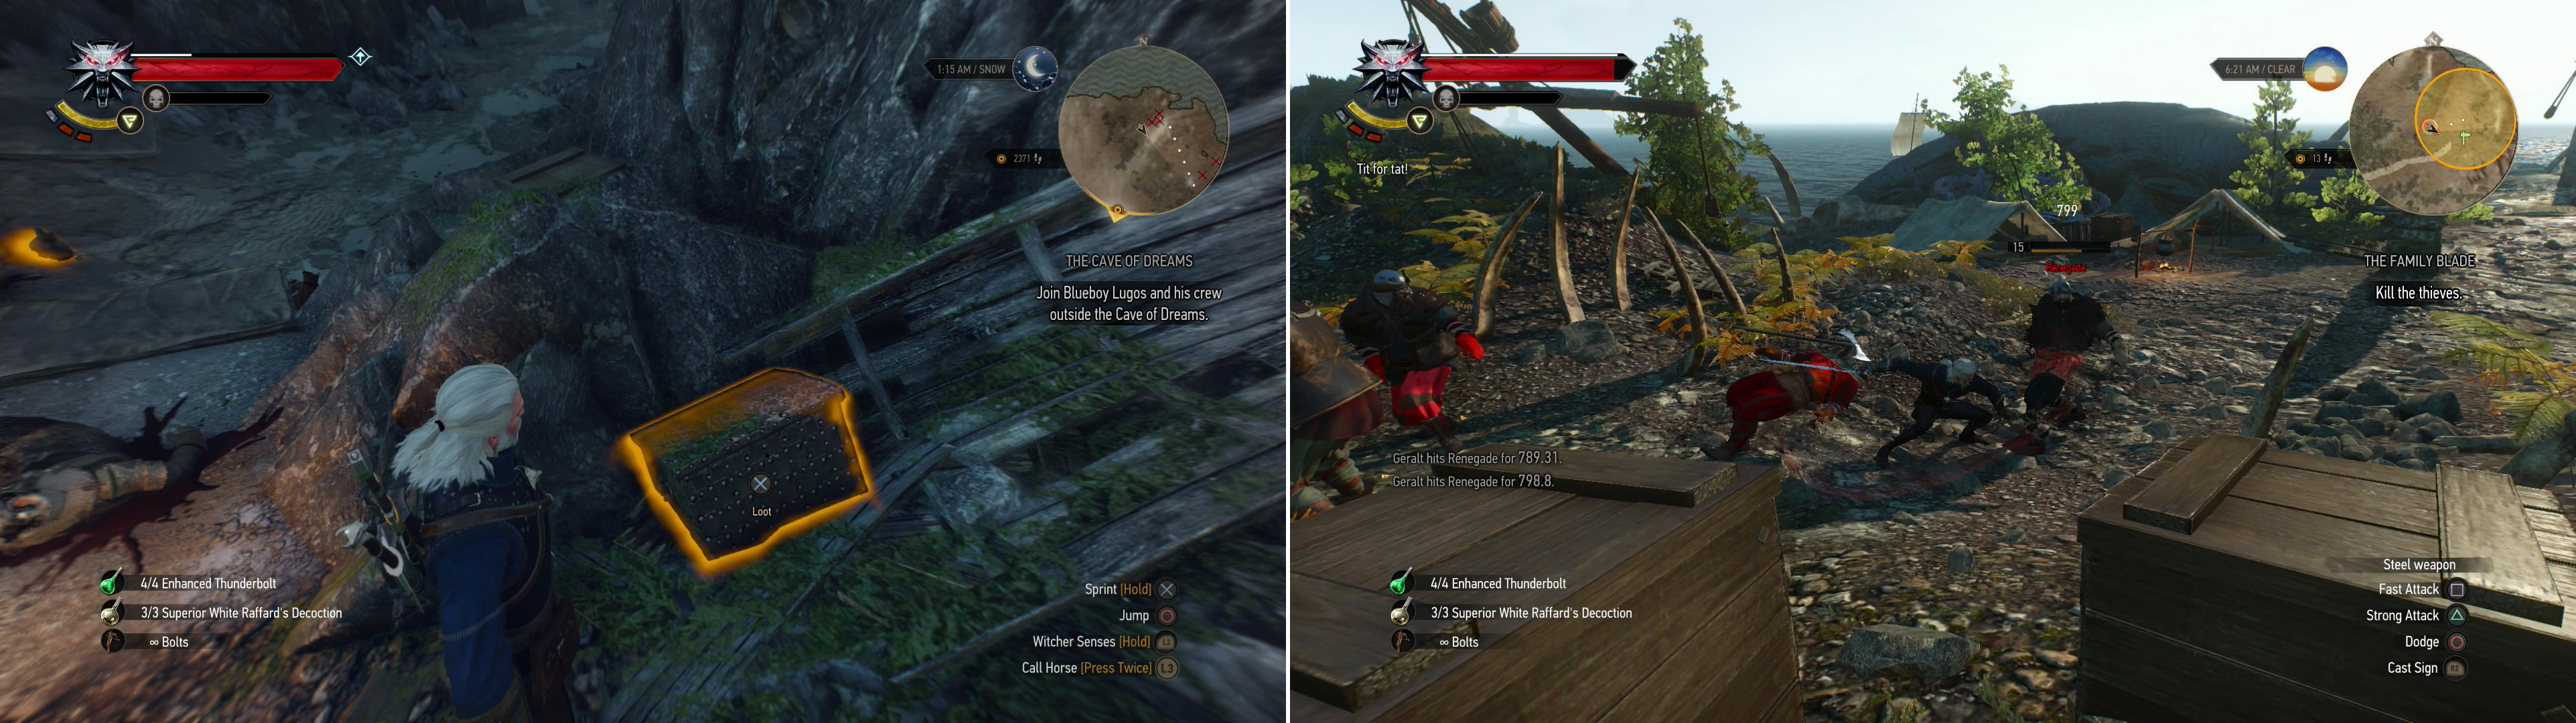 Kill the Bandits along the coast north of the “Giant’s Coast” signpost and loot a chest to find a set of Superior Griffin Diagrams (left). Kill the Bandits at the Whale Graveyard to finally claim the sword “Kuliu” (right).